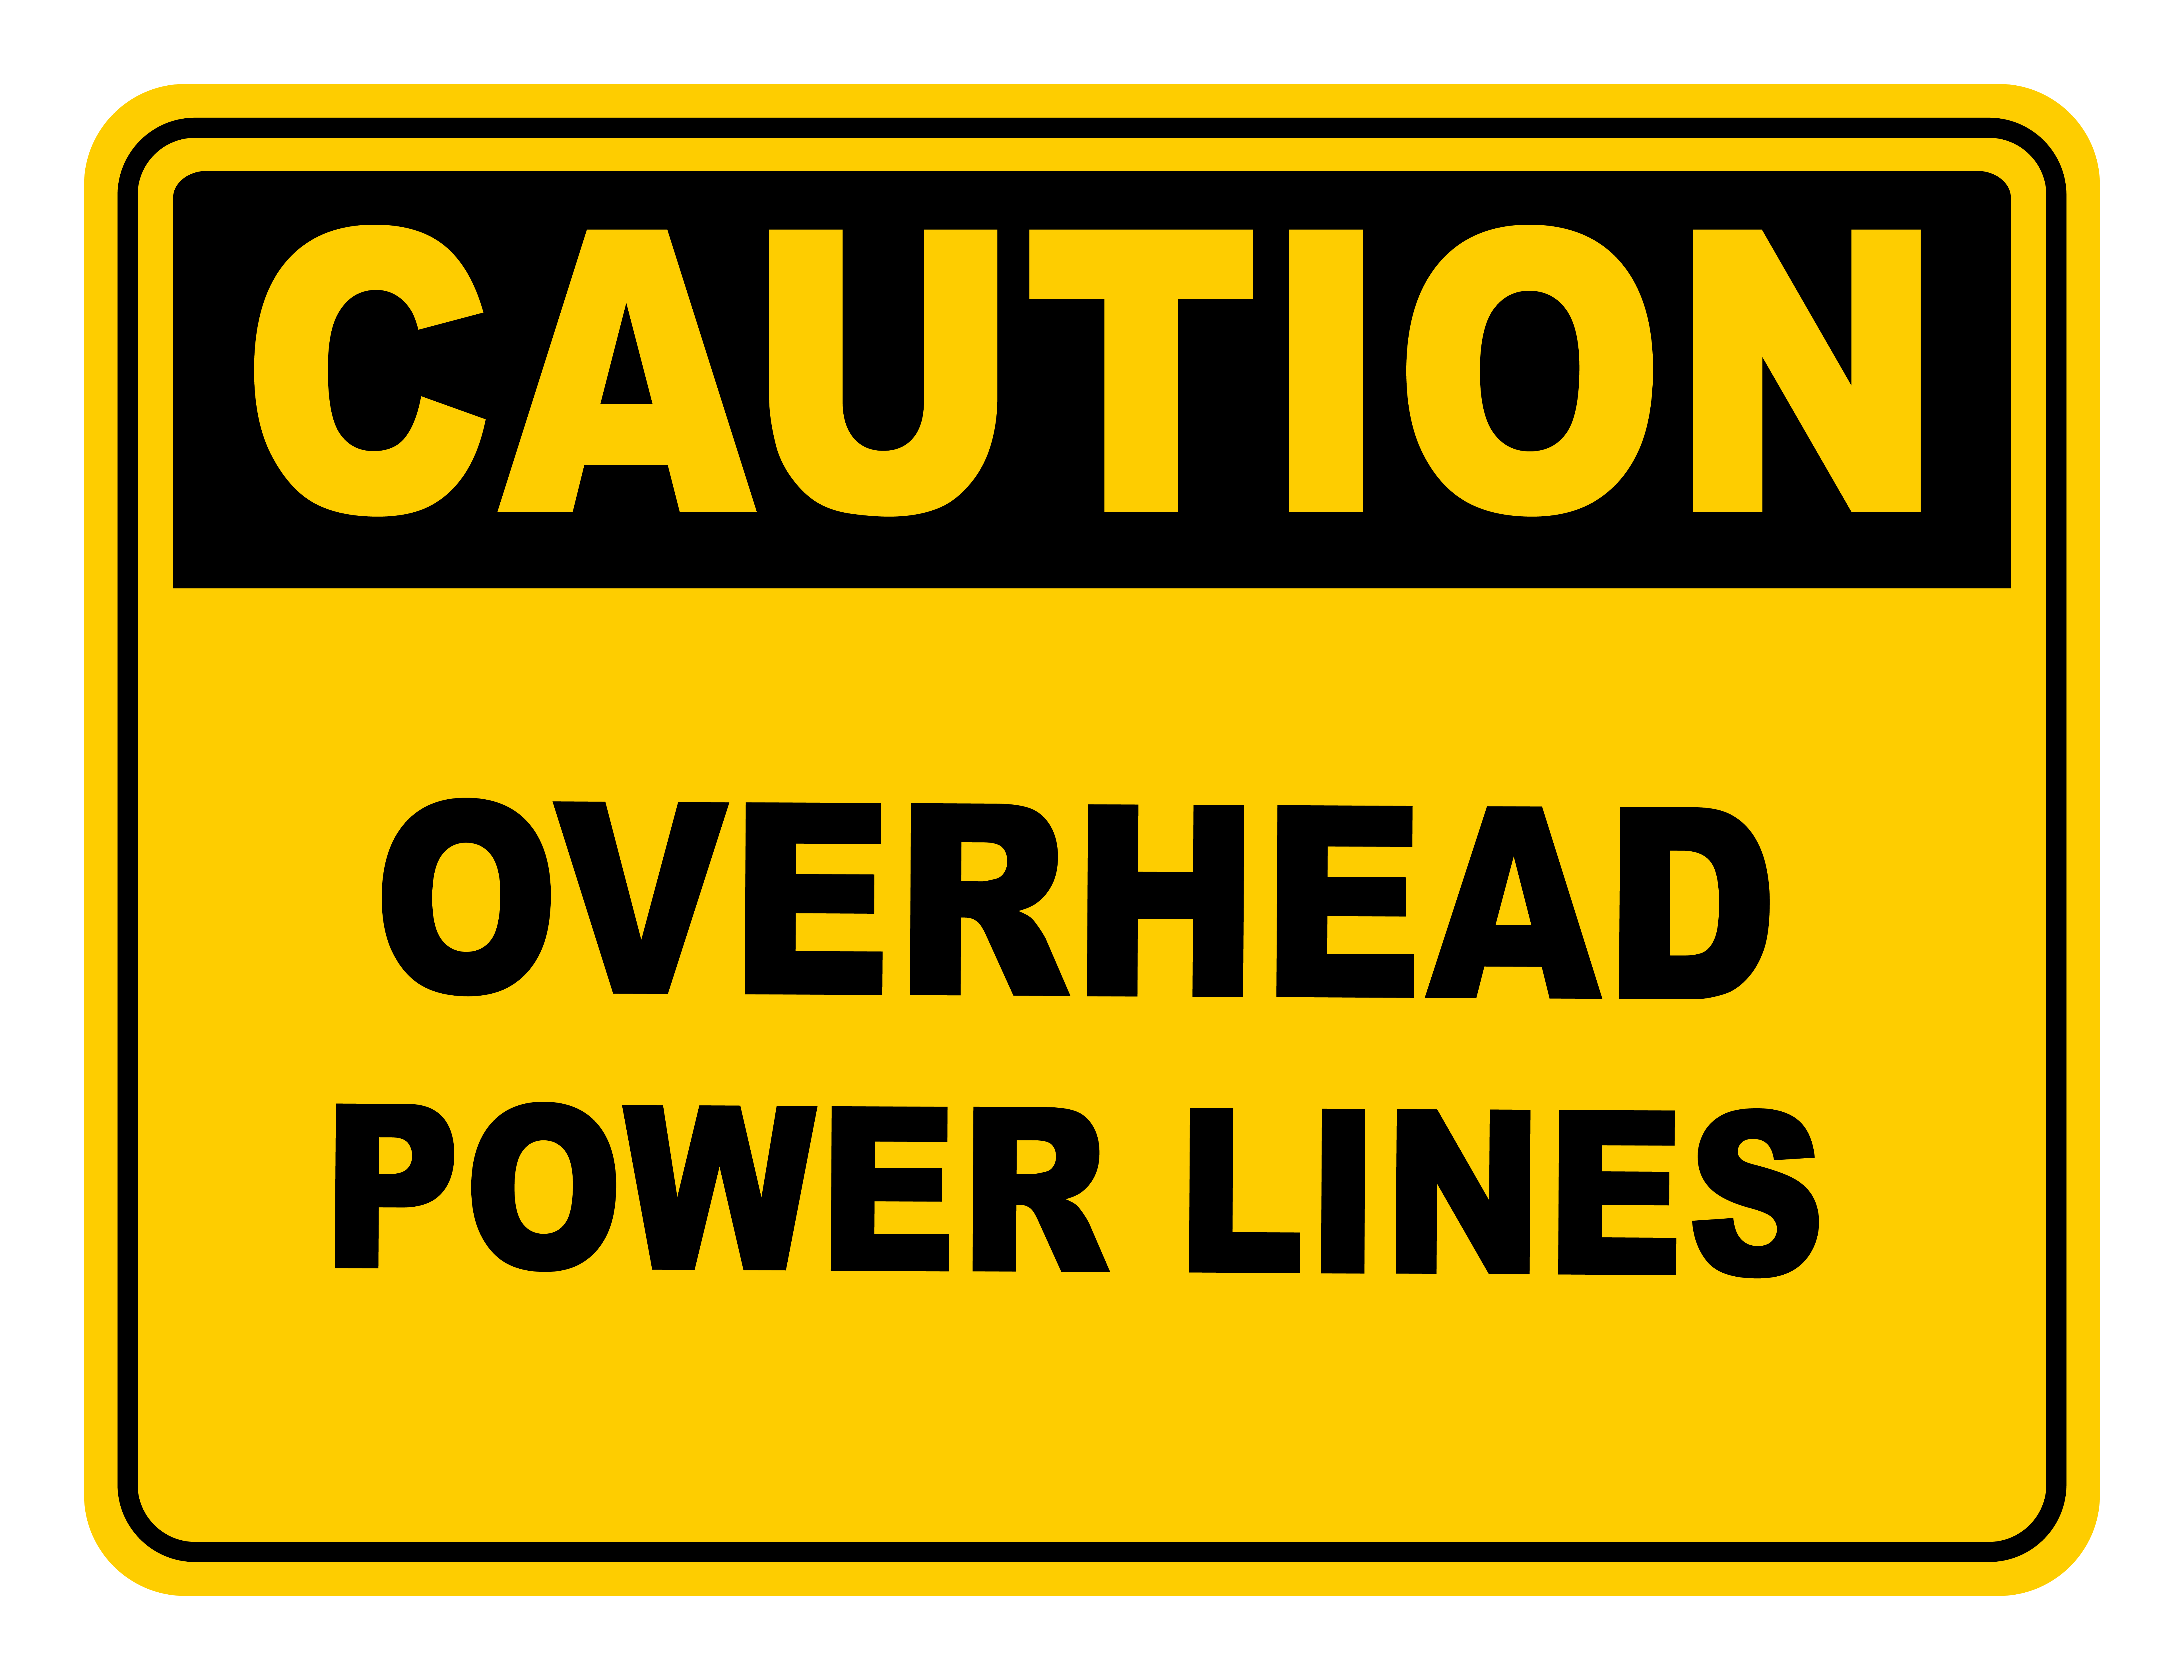 Overhead Power Lines Caution Safety Sign Safety Signs Warehouse